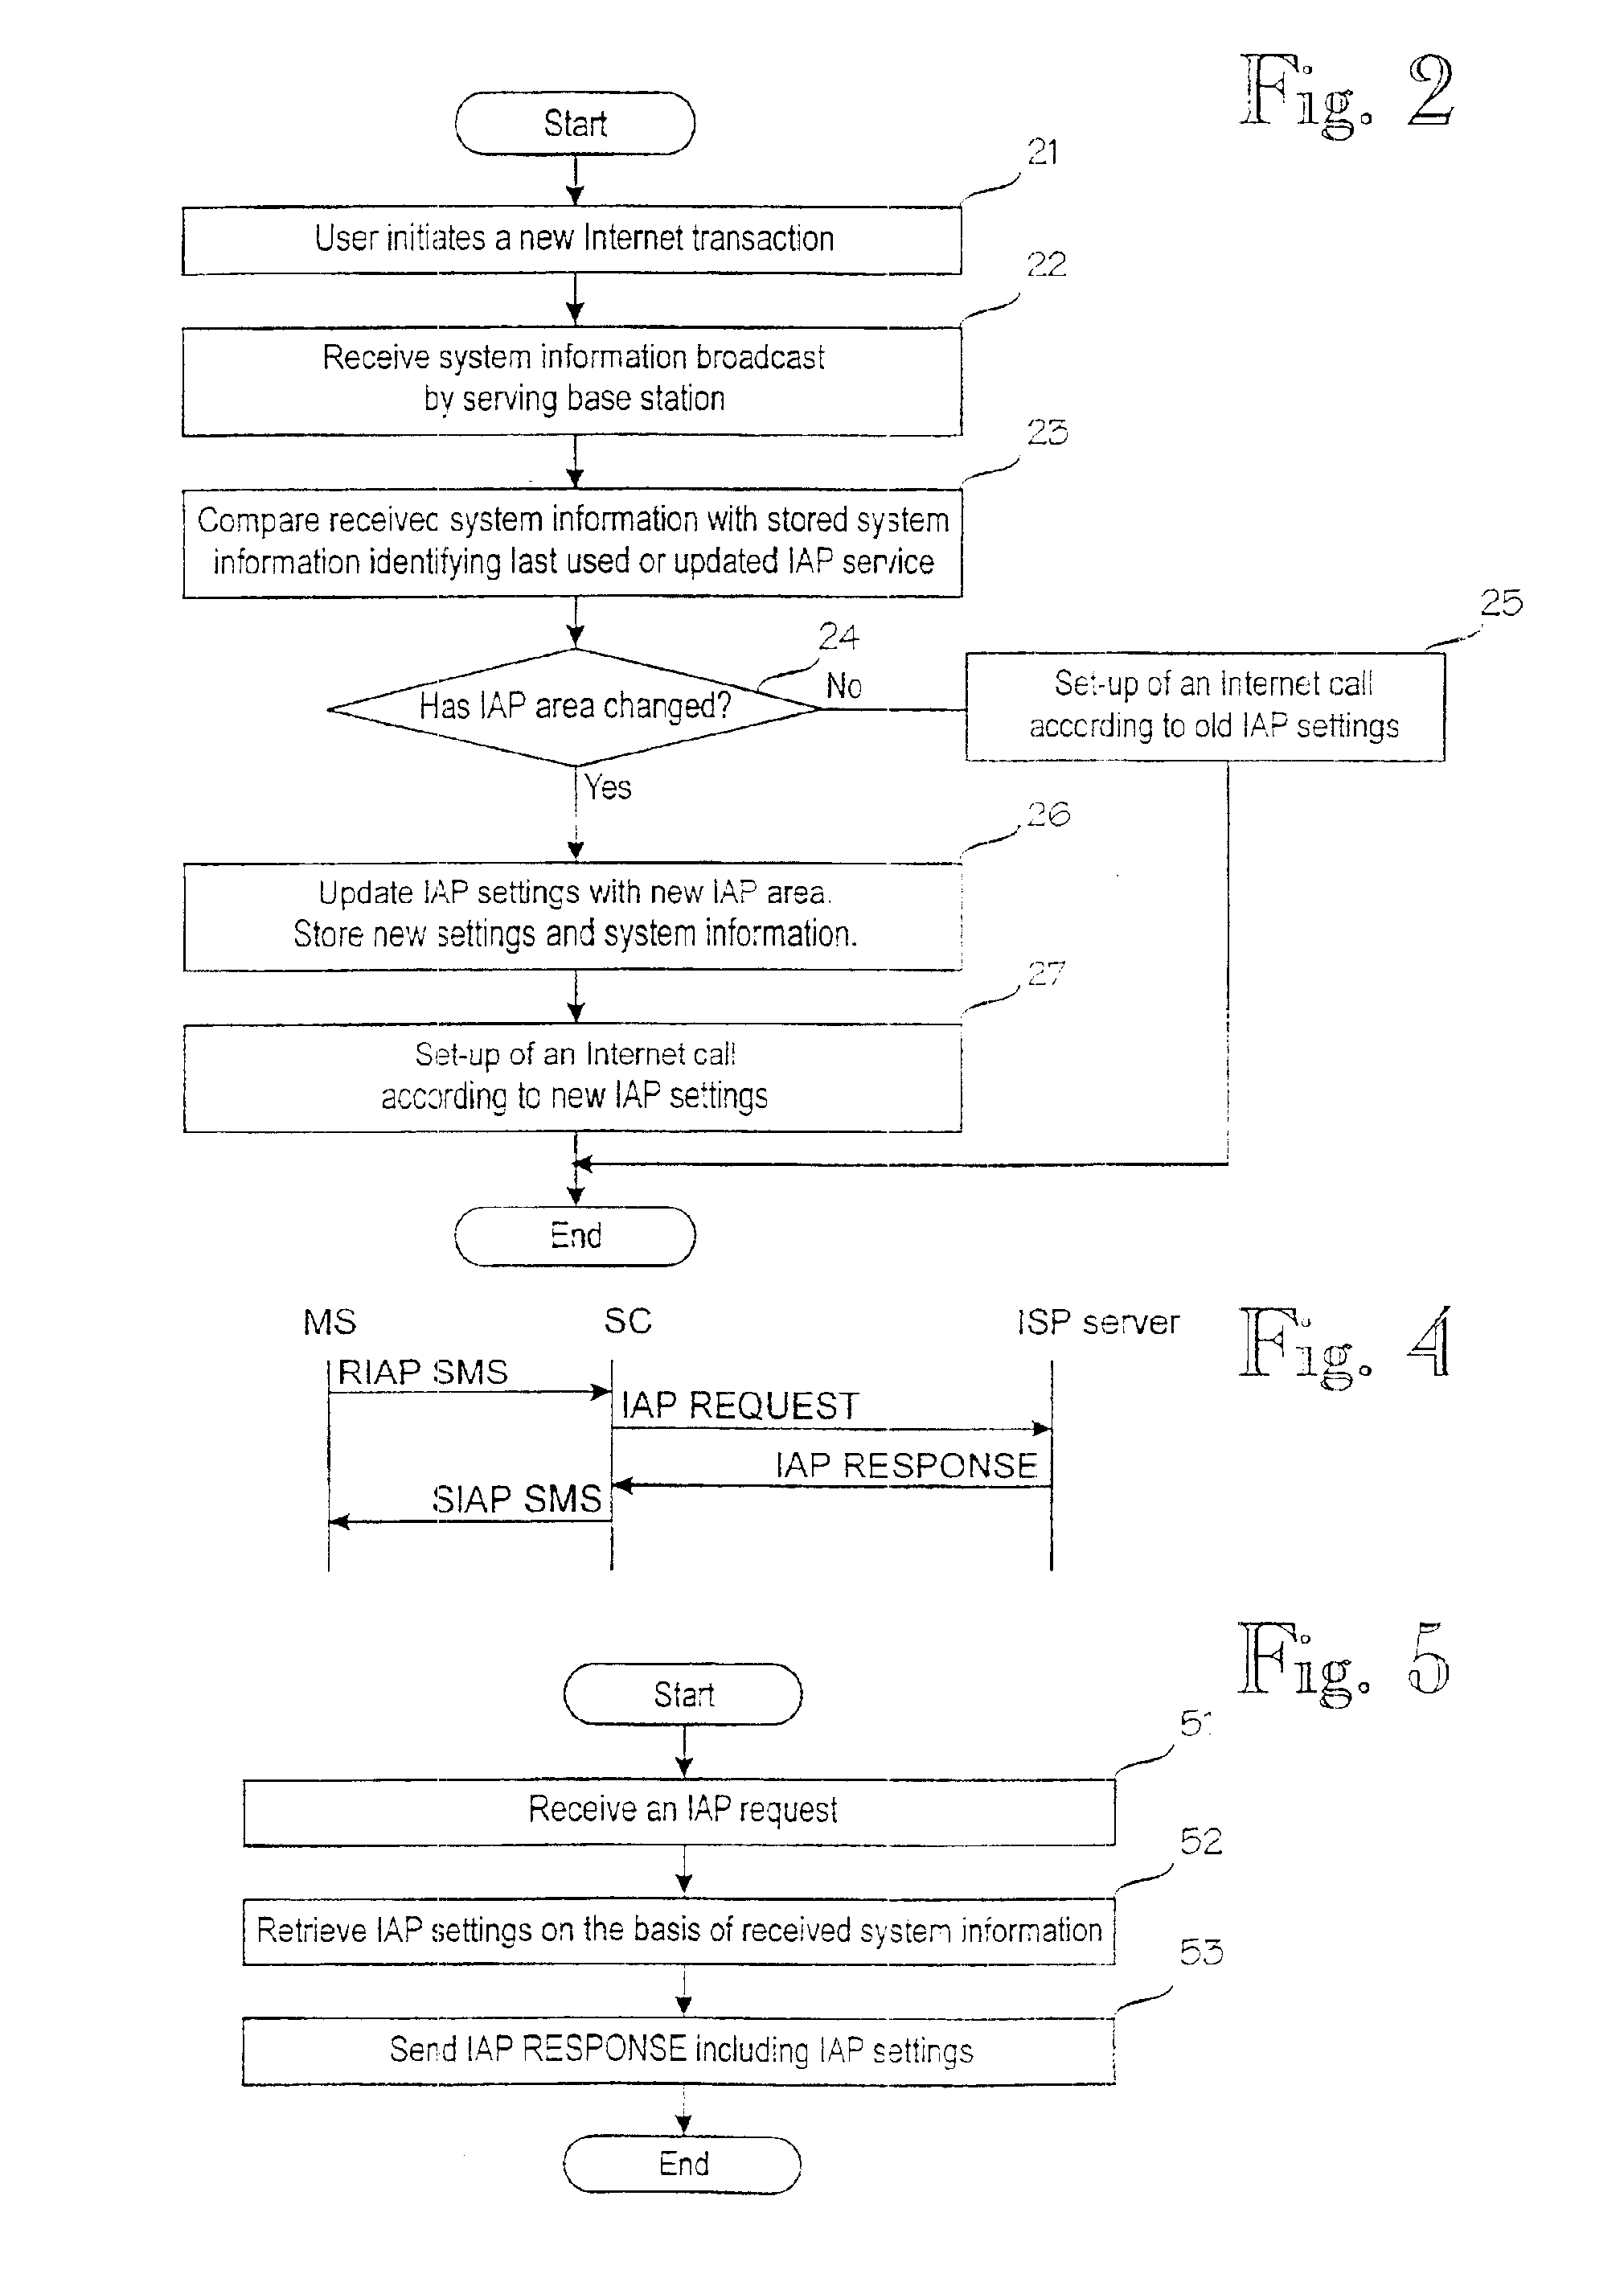 Updating of internet access point settings in a mobile communication system